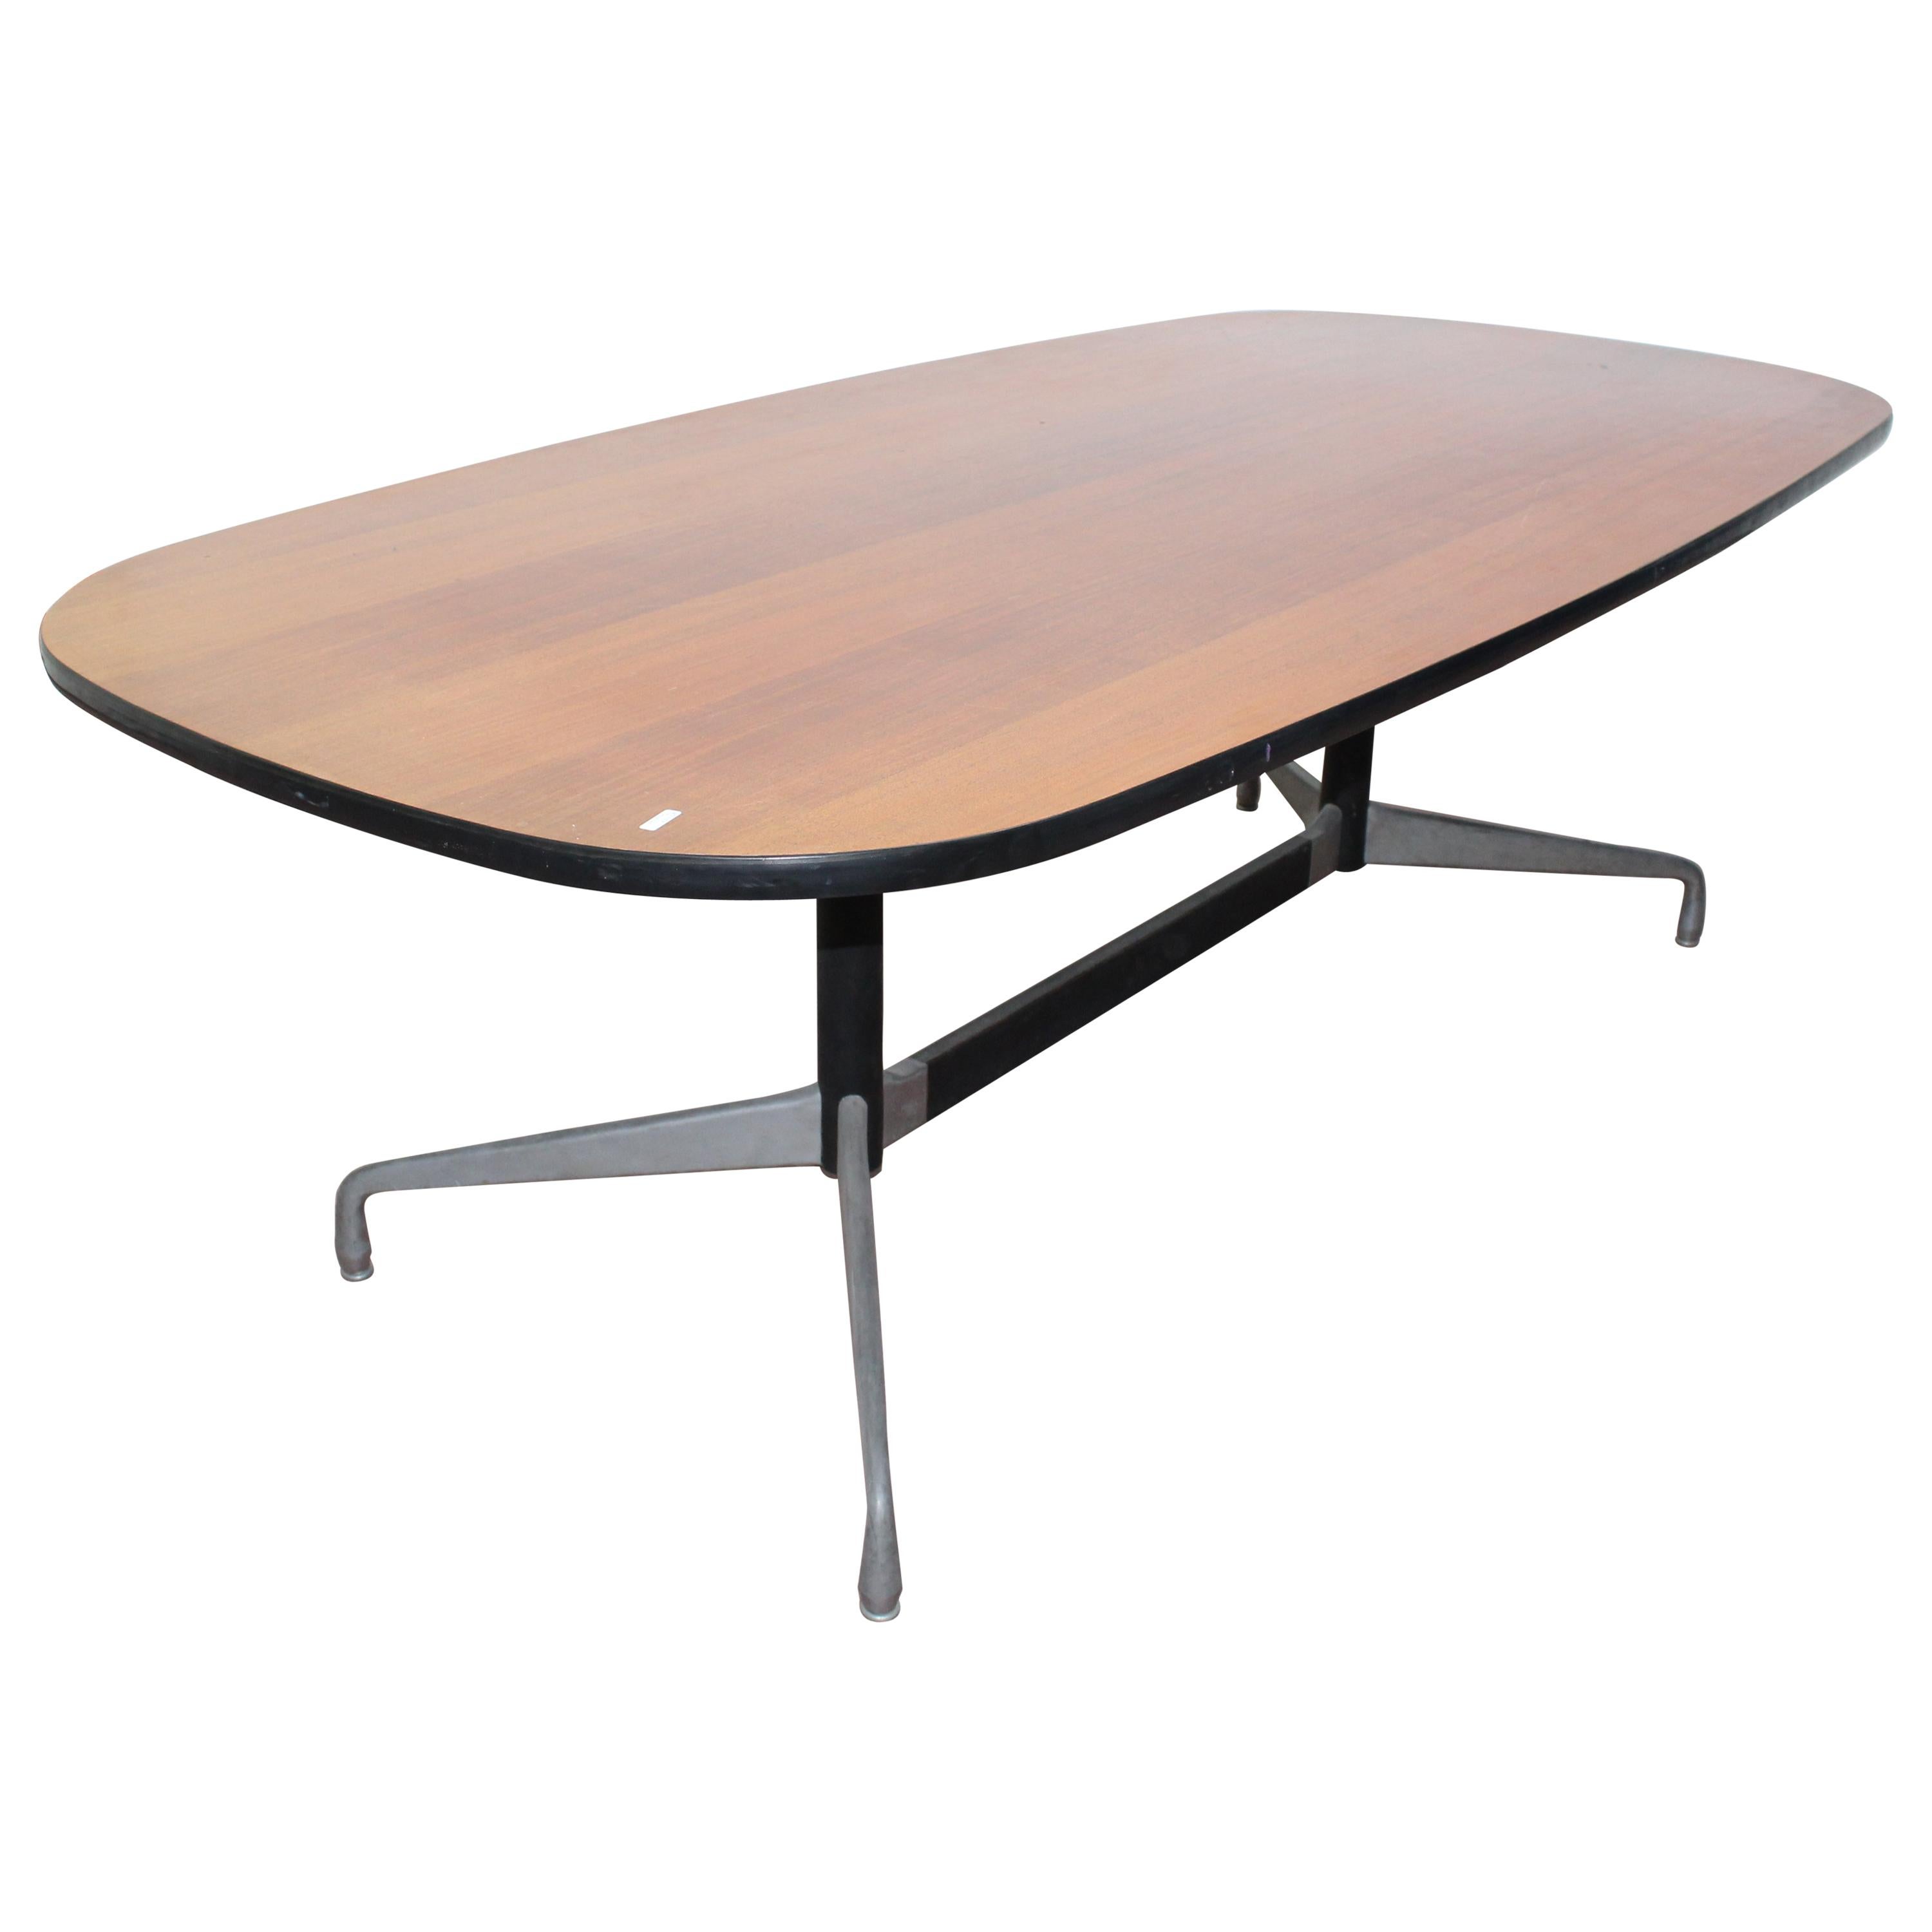 20th Century Modern Ashwood Conference Table Charles Eames 60s